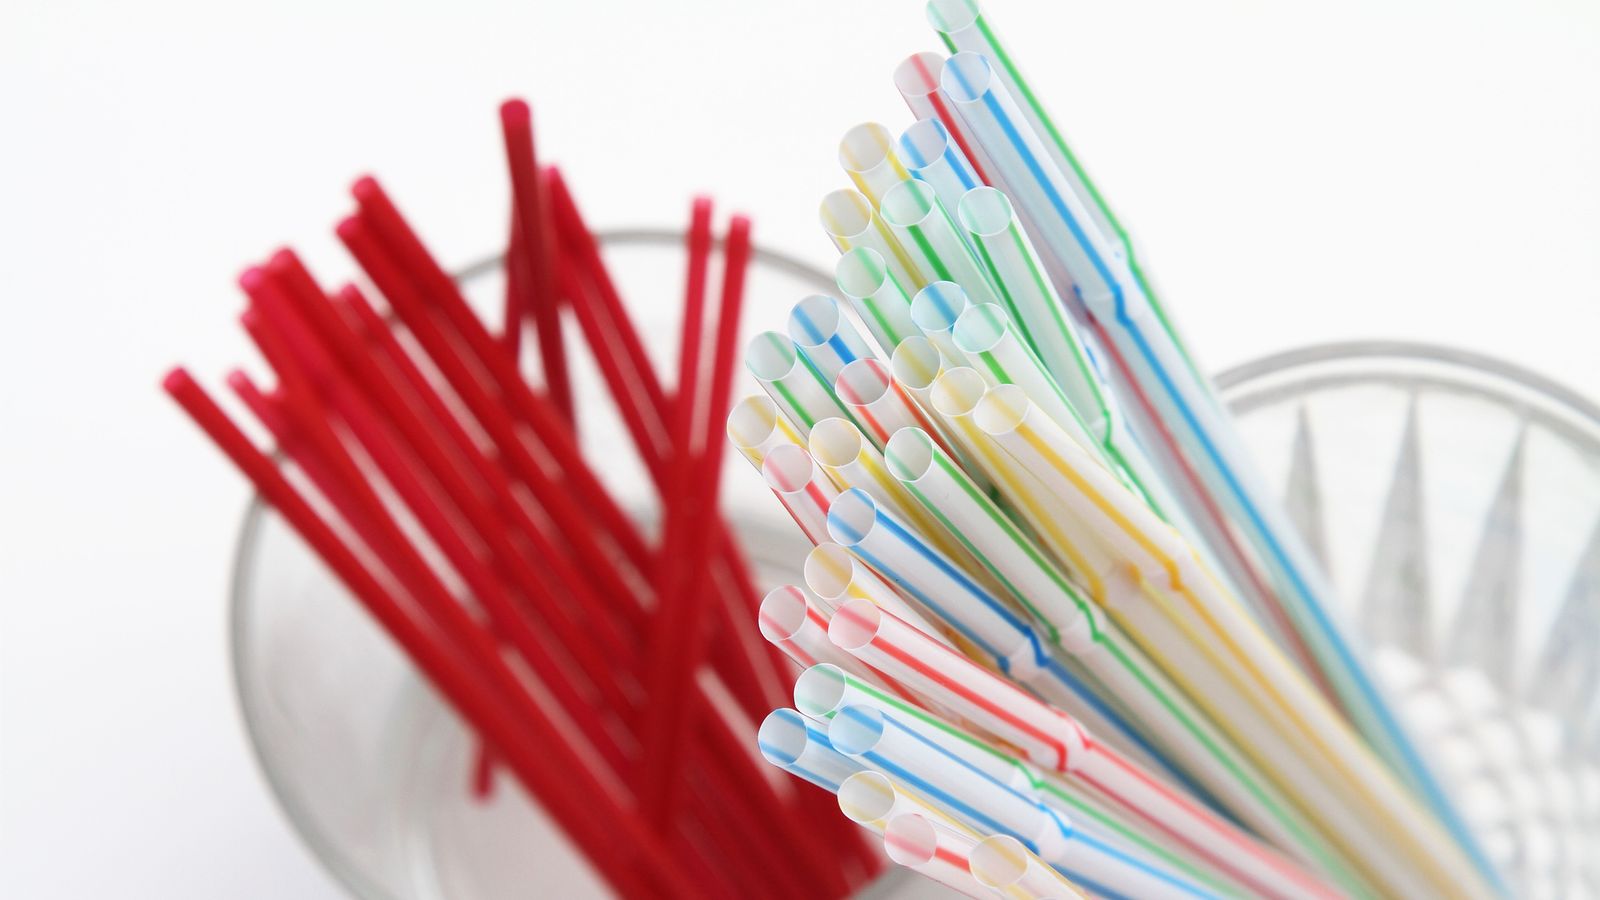 Plastic straws, stirrers and cotton buds will be banned in England from nex...